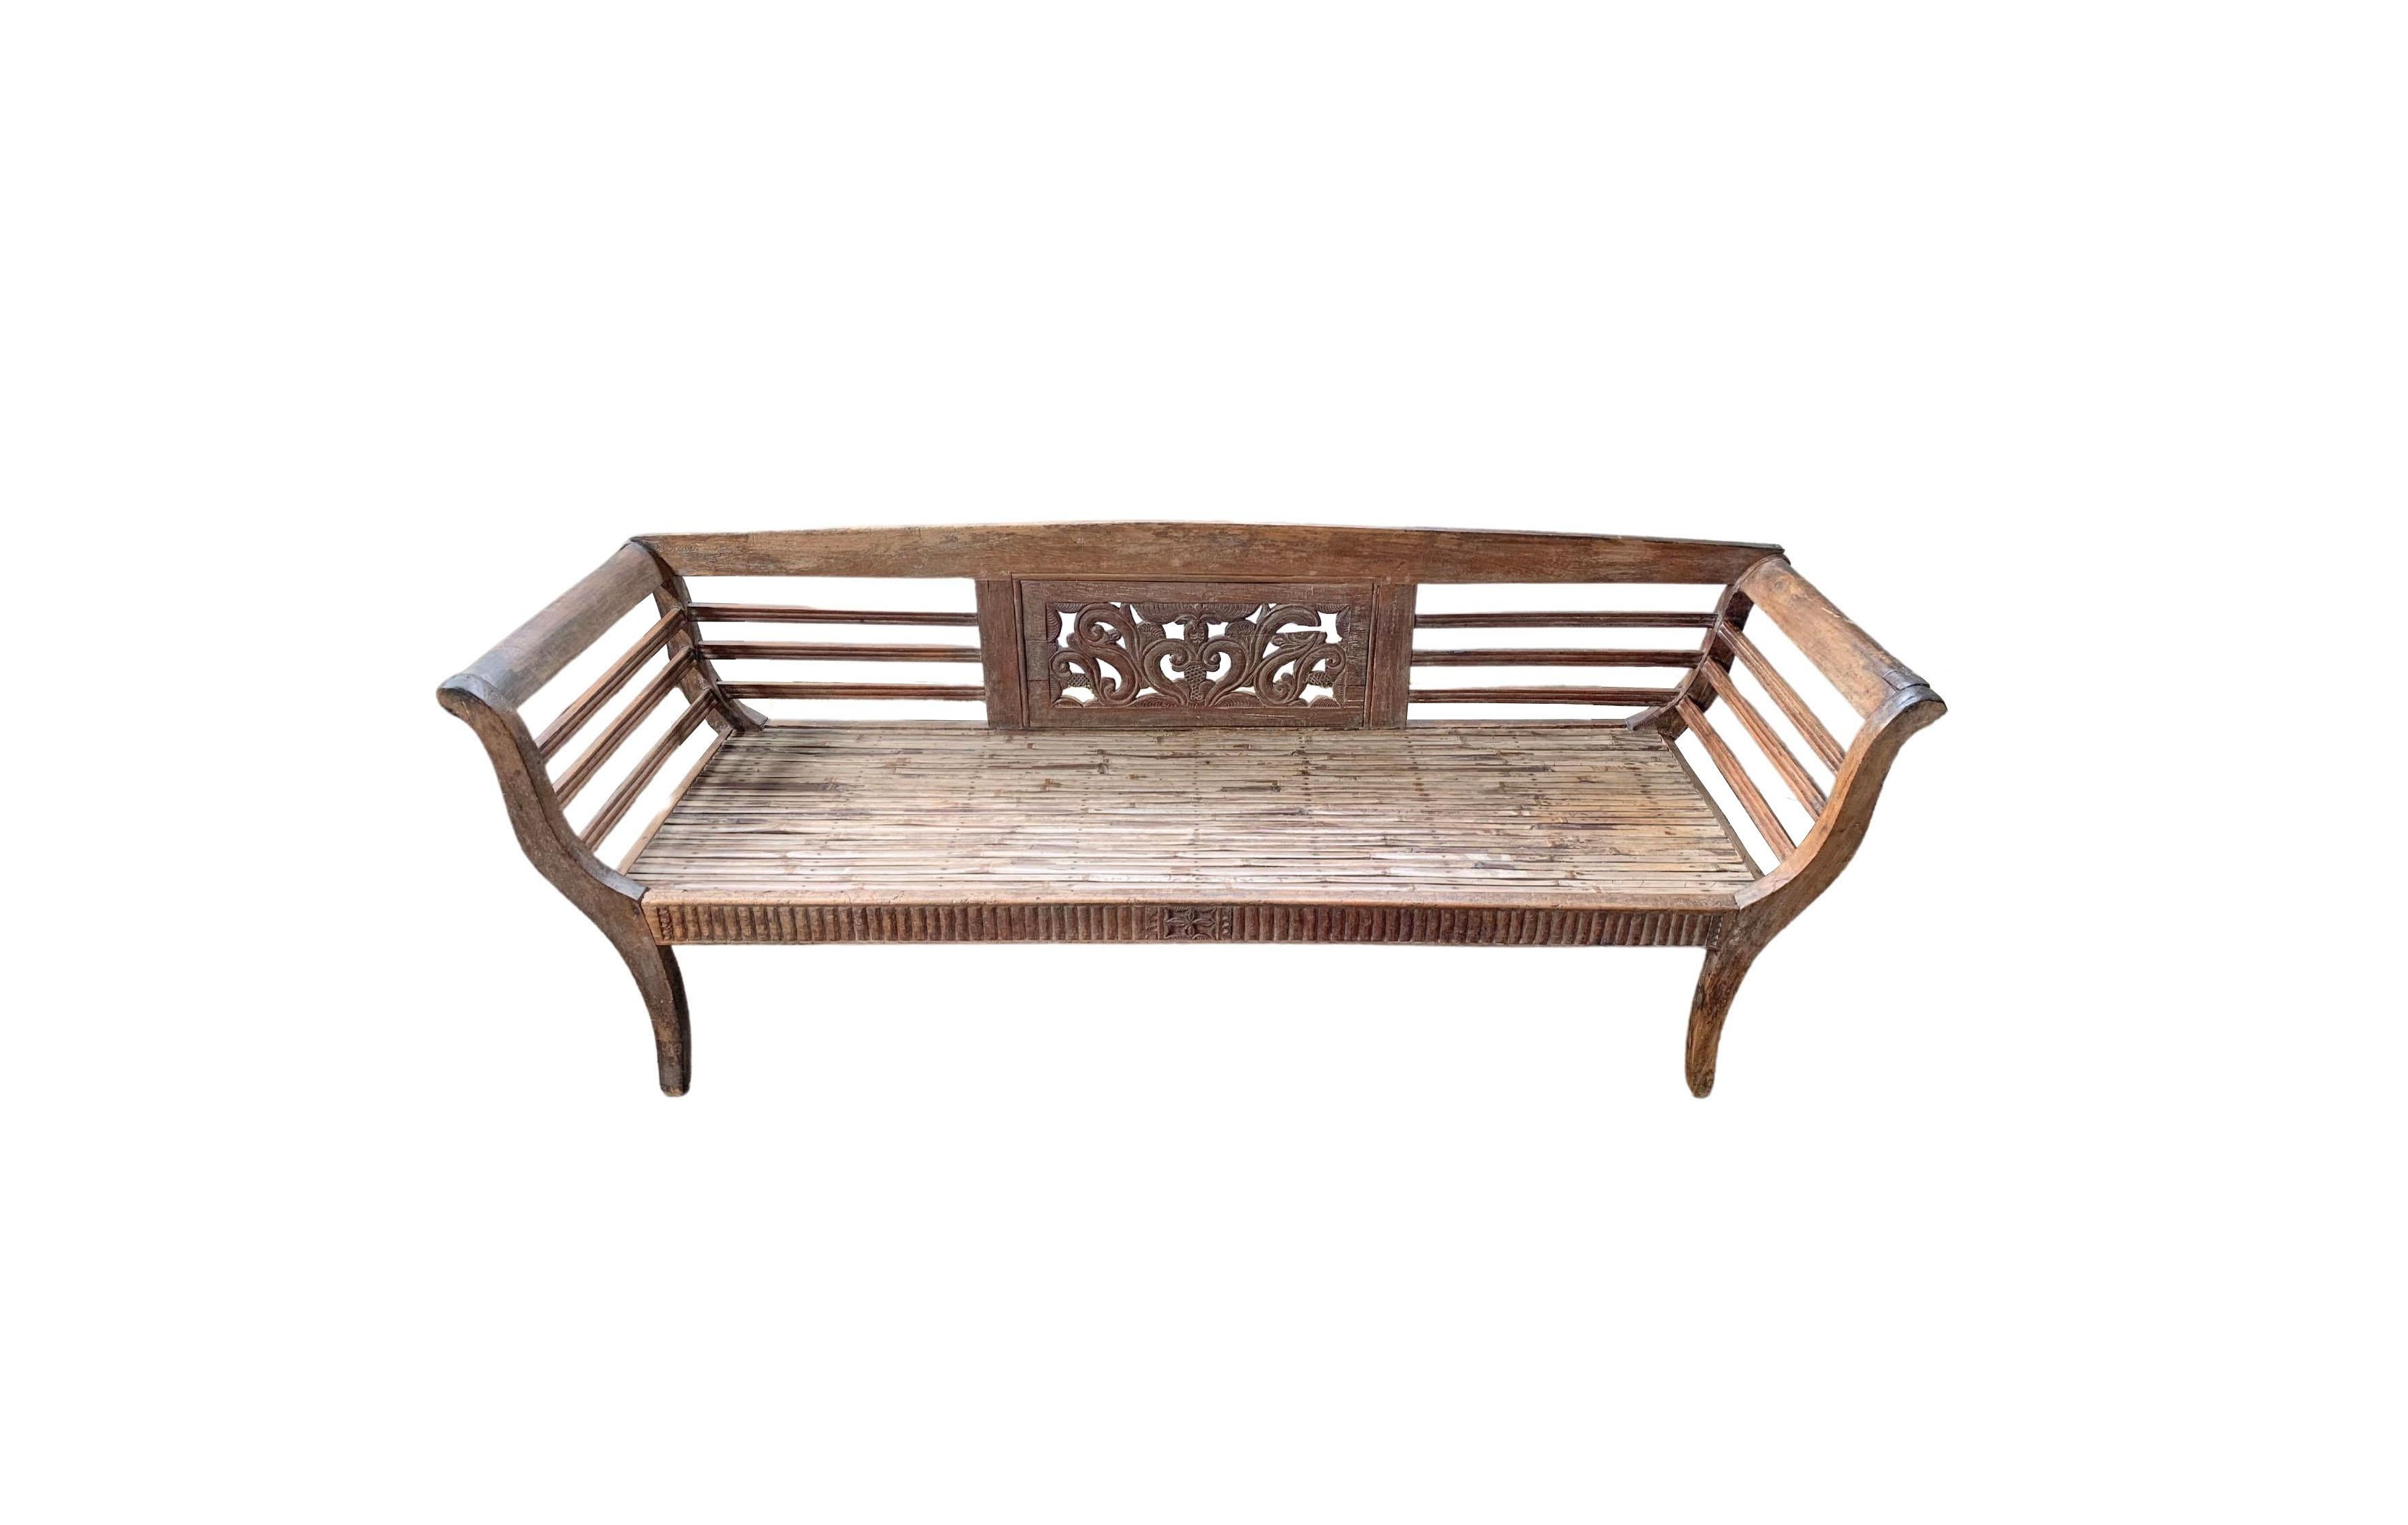 This hand-carved teak wood bench originates from the Island of Madura, off the coast of Northeastern Java. It features a wonderful array of carved detailing along its frame which includes floral engravings. The seat is crafted from long bamboo